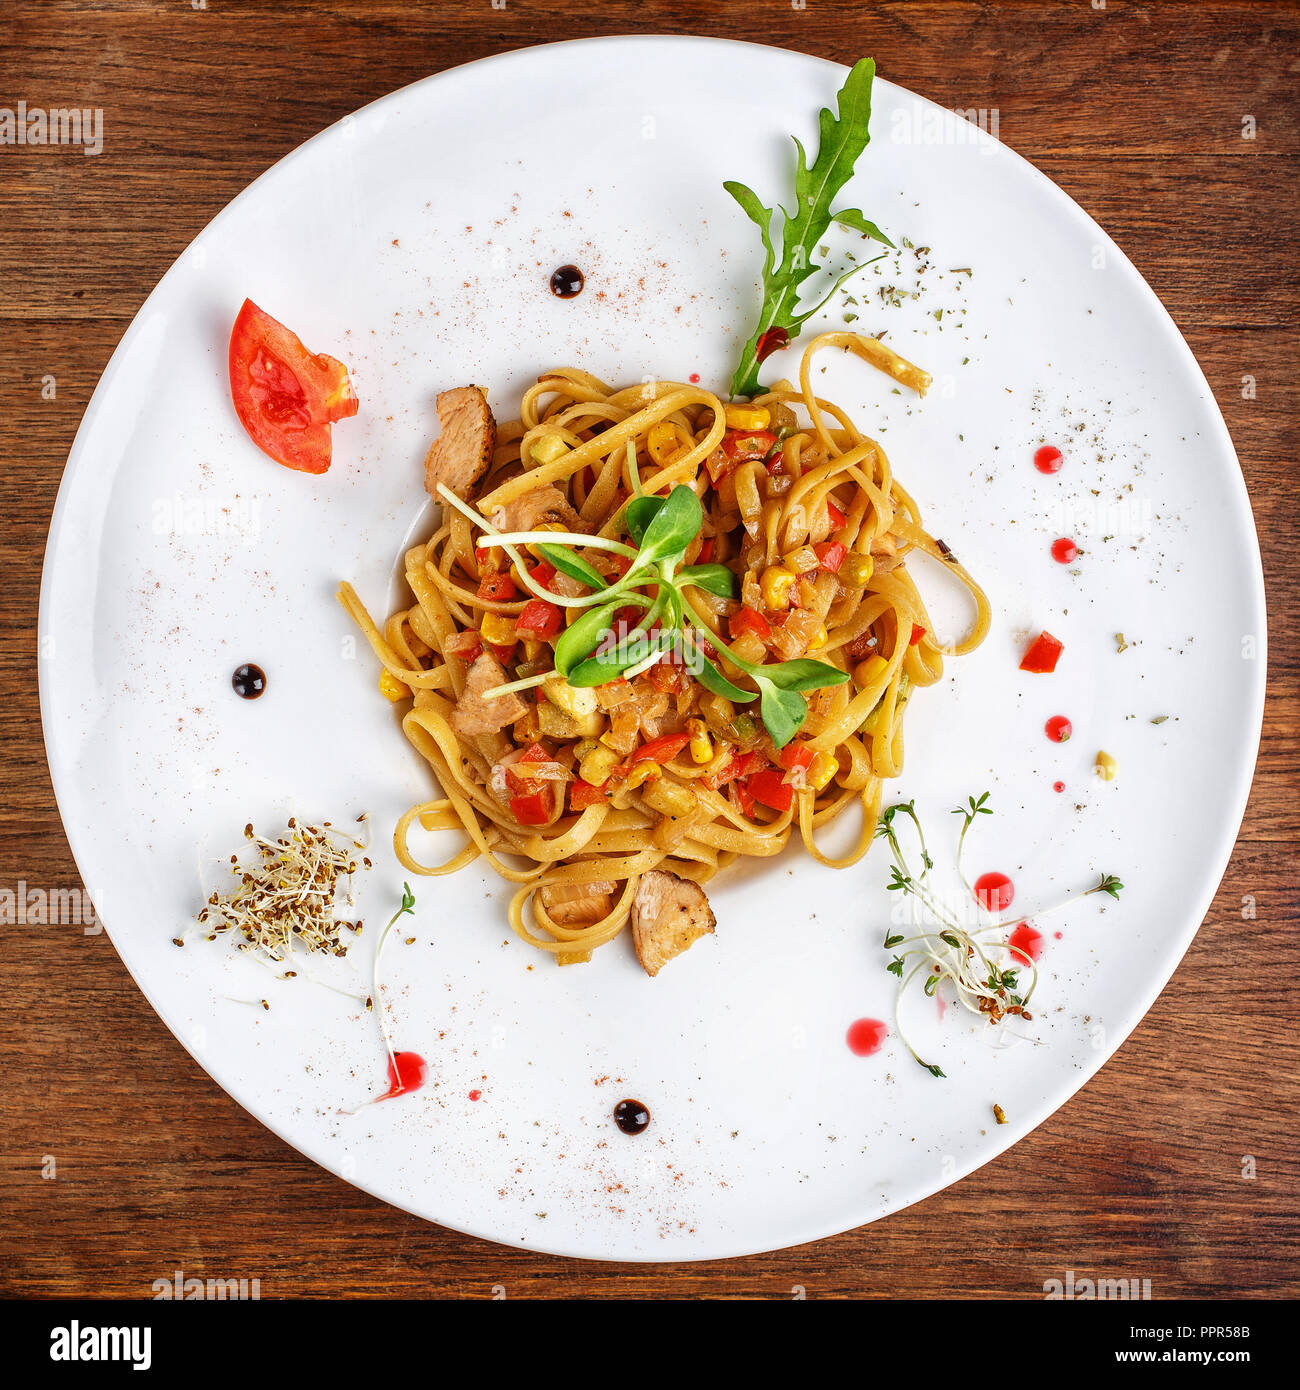 Delicious dishes from the chef. Ready made pasta with slices of meat, pepper and greens Stock Photo